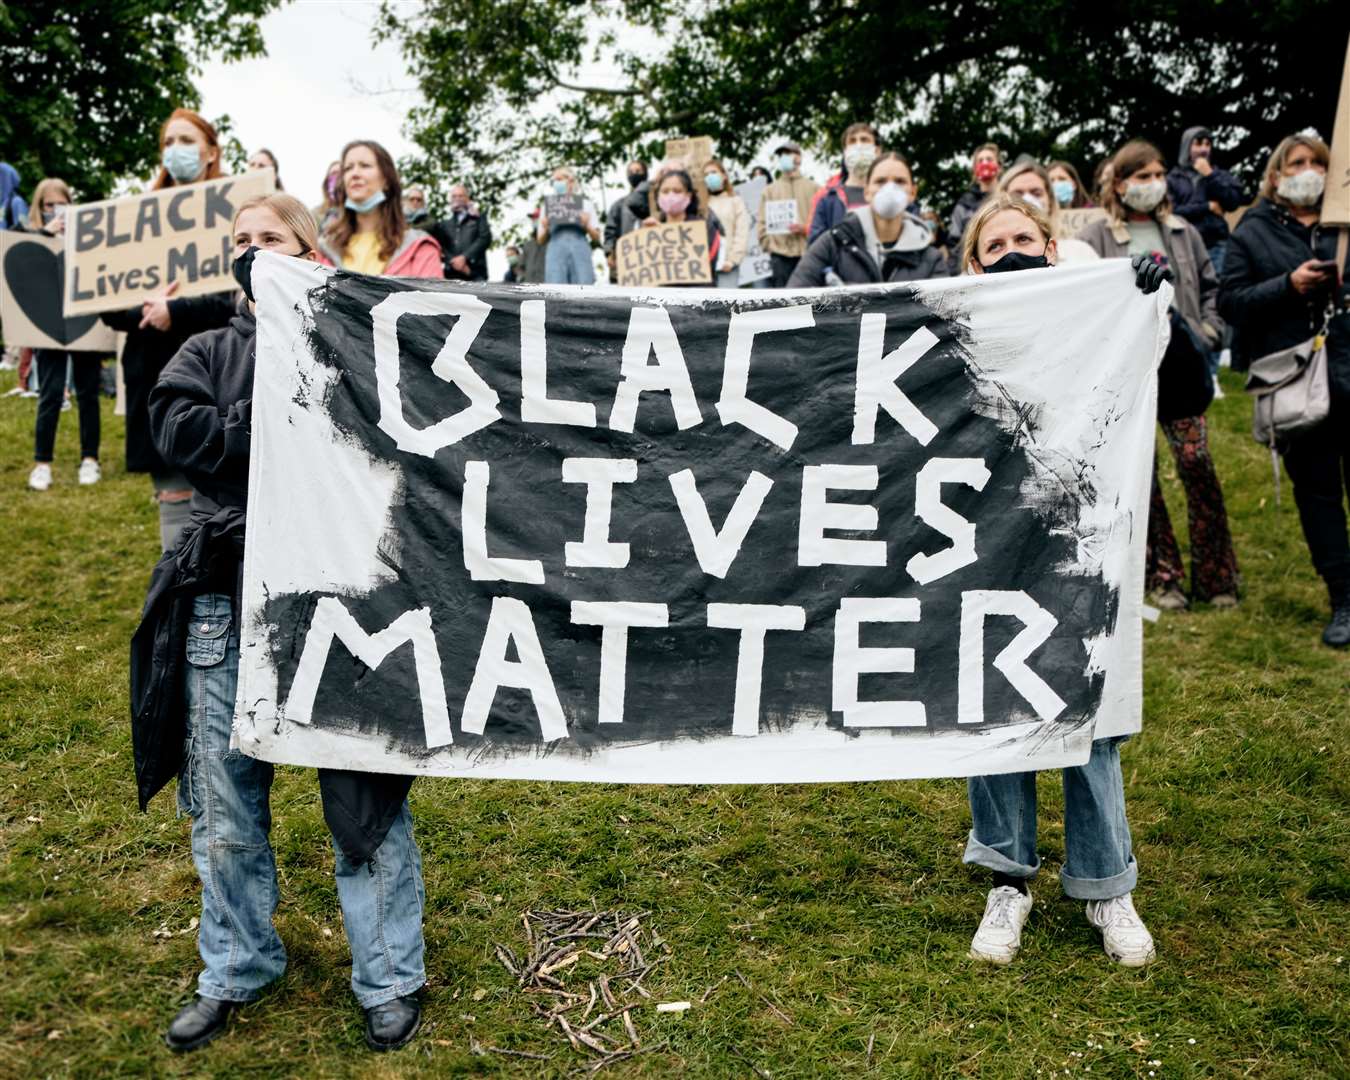 Protests took place around the county in support of the Black Lives Matter movement - including this one in Tunbridge Wells. Picture: Mikey Reed